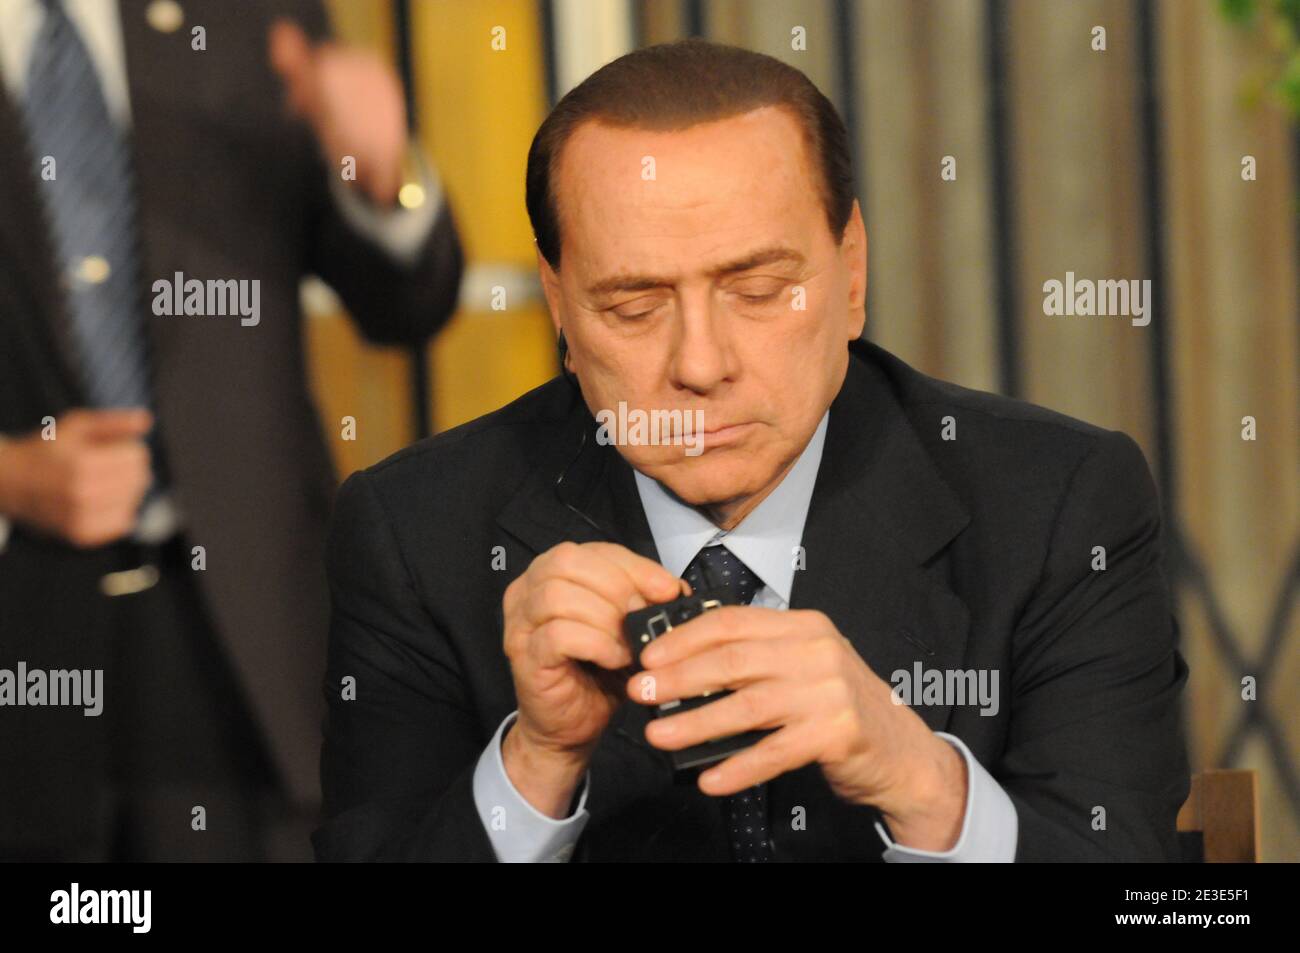 Italian Prime Minister Silvio Berlusconi seems quite tired, and sometimes sleepy, during a joint press conference with other European leaders at the residence of Israeli Prime Minister Ehud Olmert in Jerusalem, Israel on January 18, 2009. Photo by Ammar Abd Rabbo/ABACAPRESS.COM Stock Photo